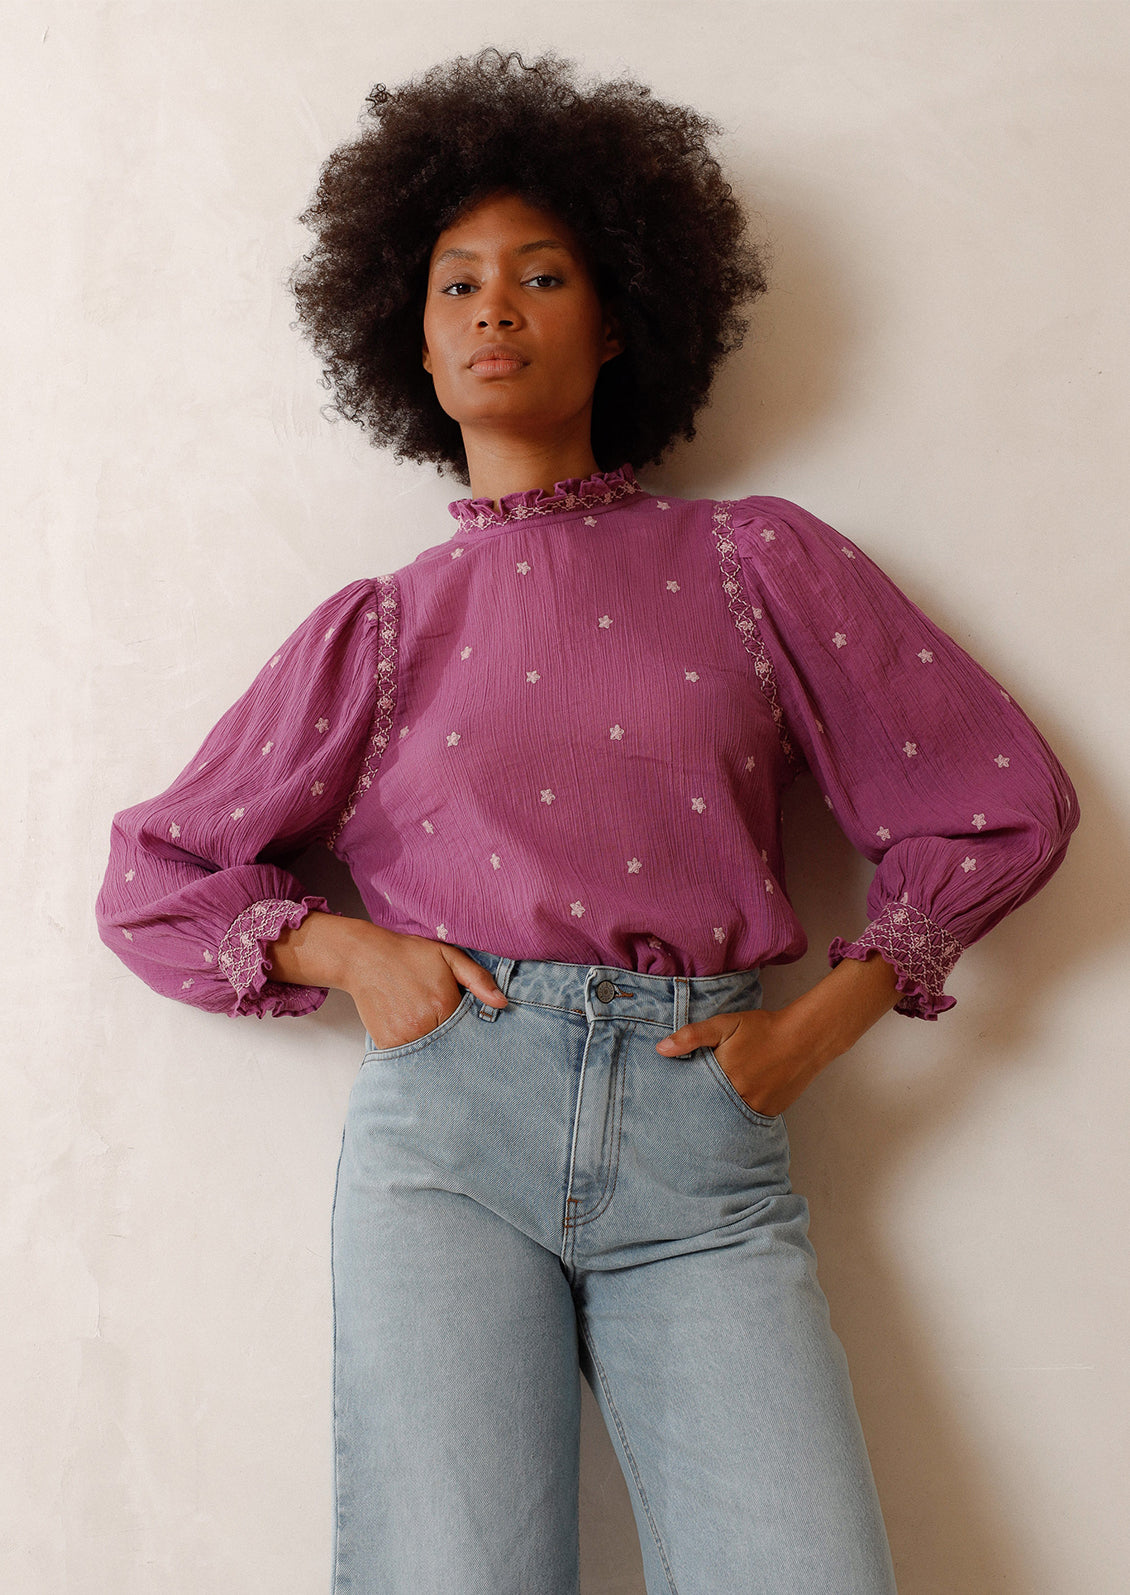 Woman wearing magenta top with embroidered details and blue jeans. 